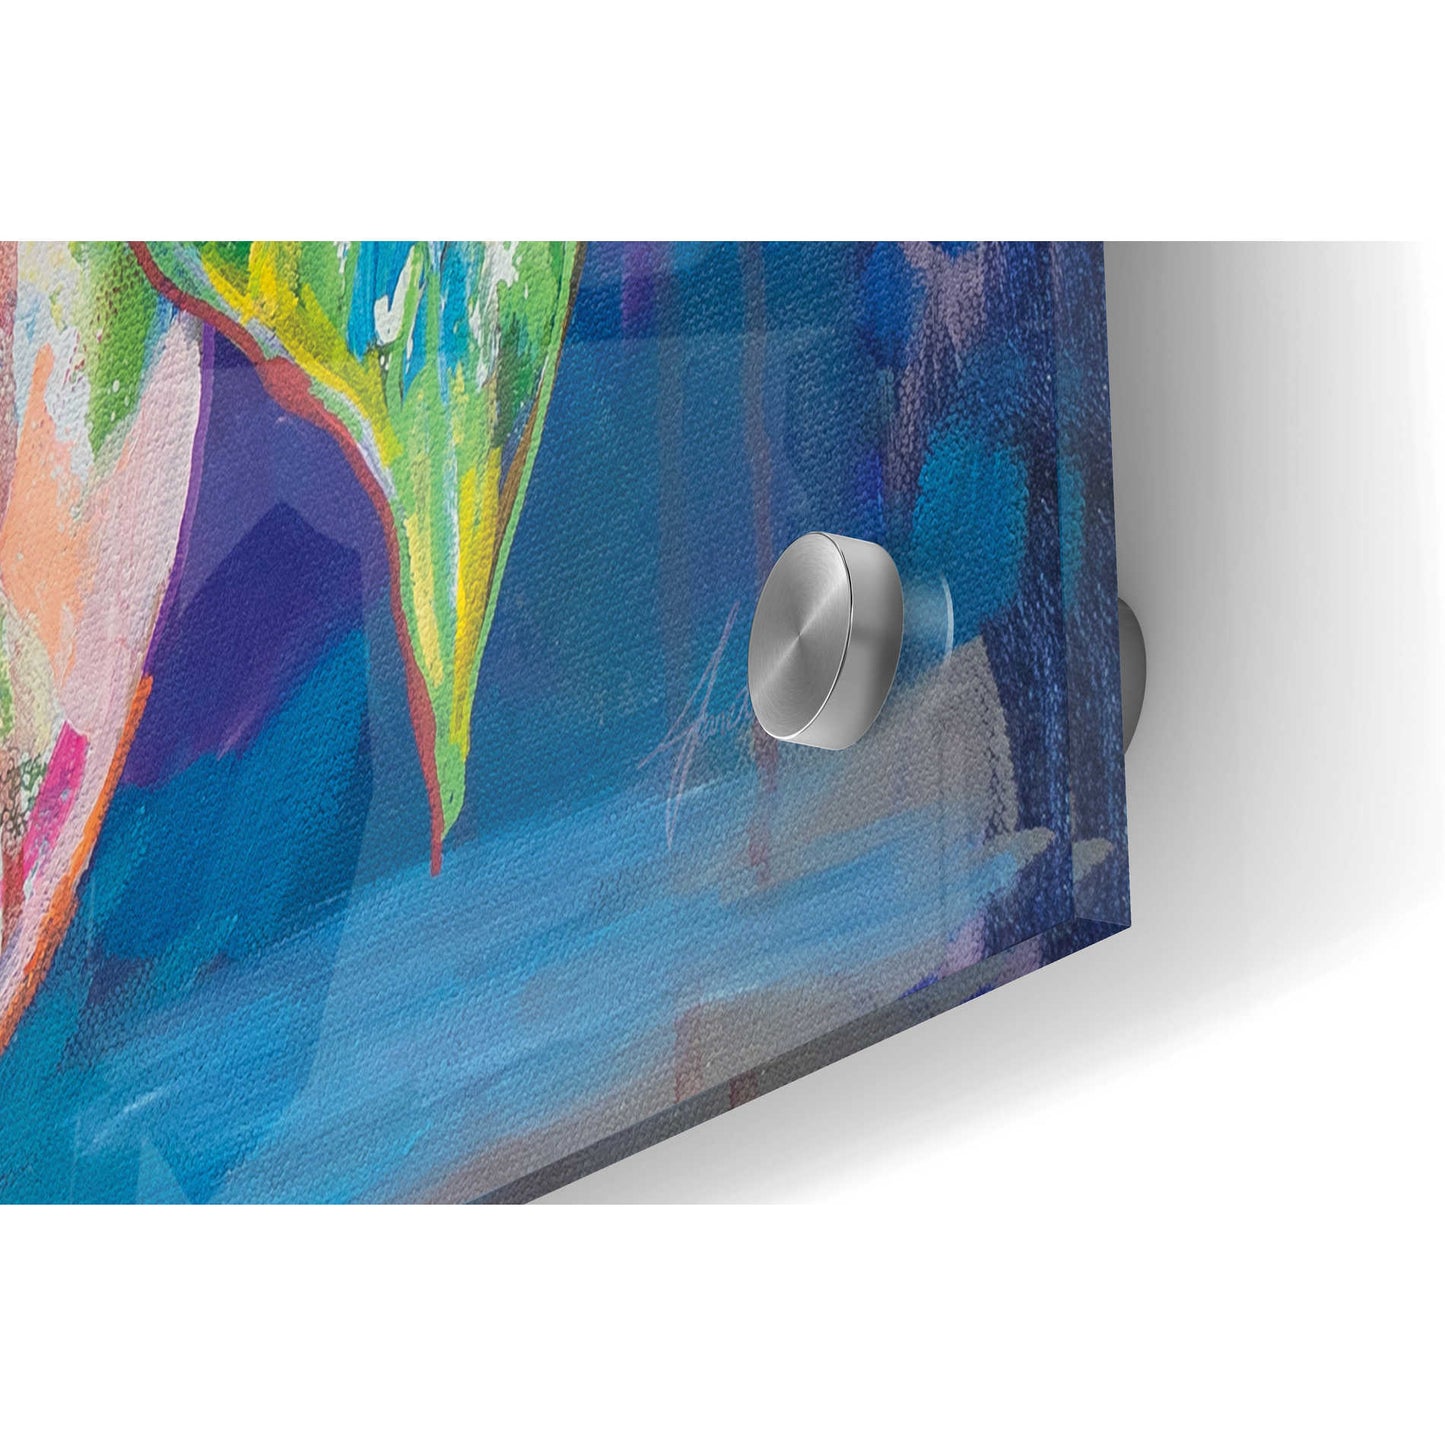 Epic Art 'Happiness' by Jeanette Vertentes, Acrylic Glass Wall Art,36x24